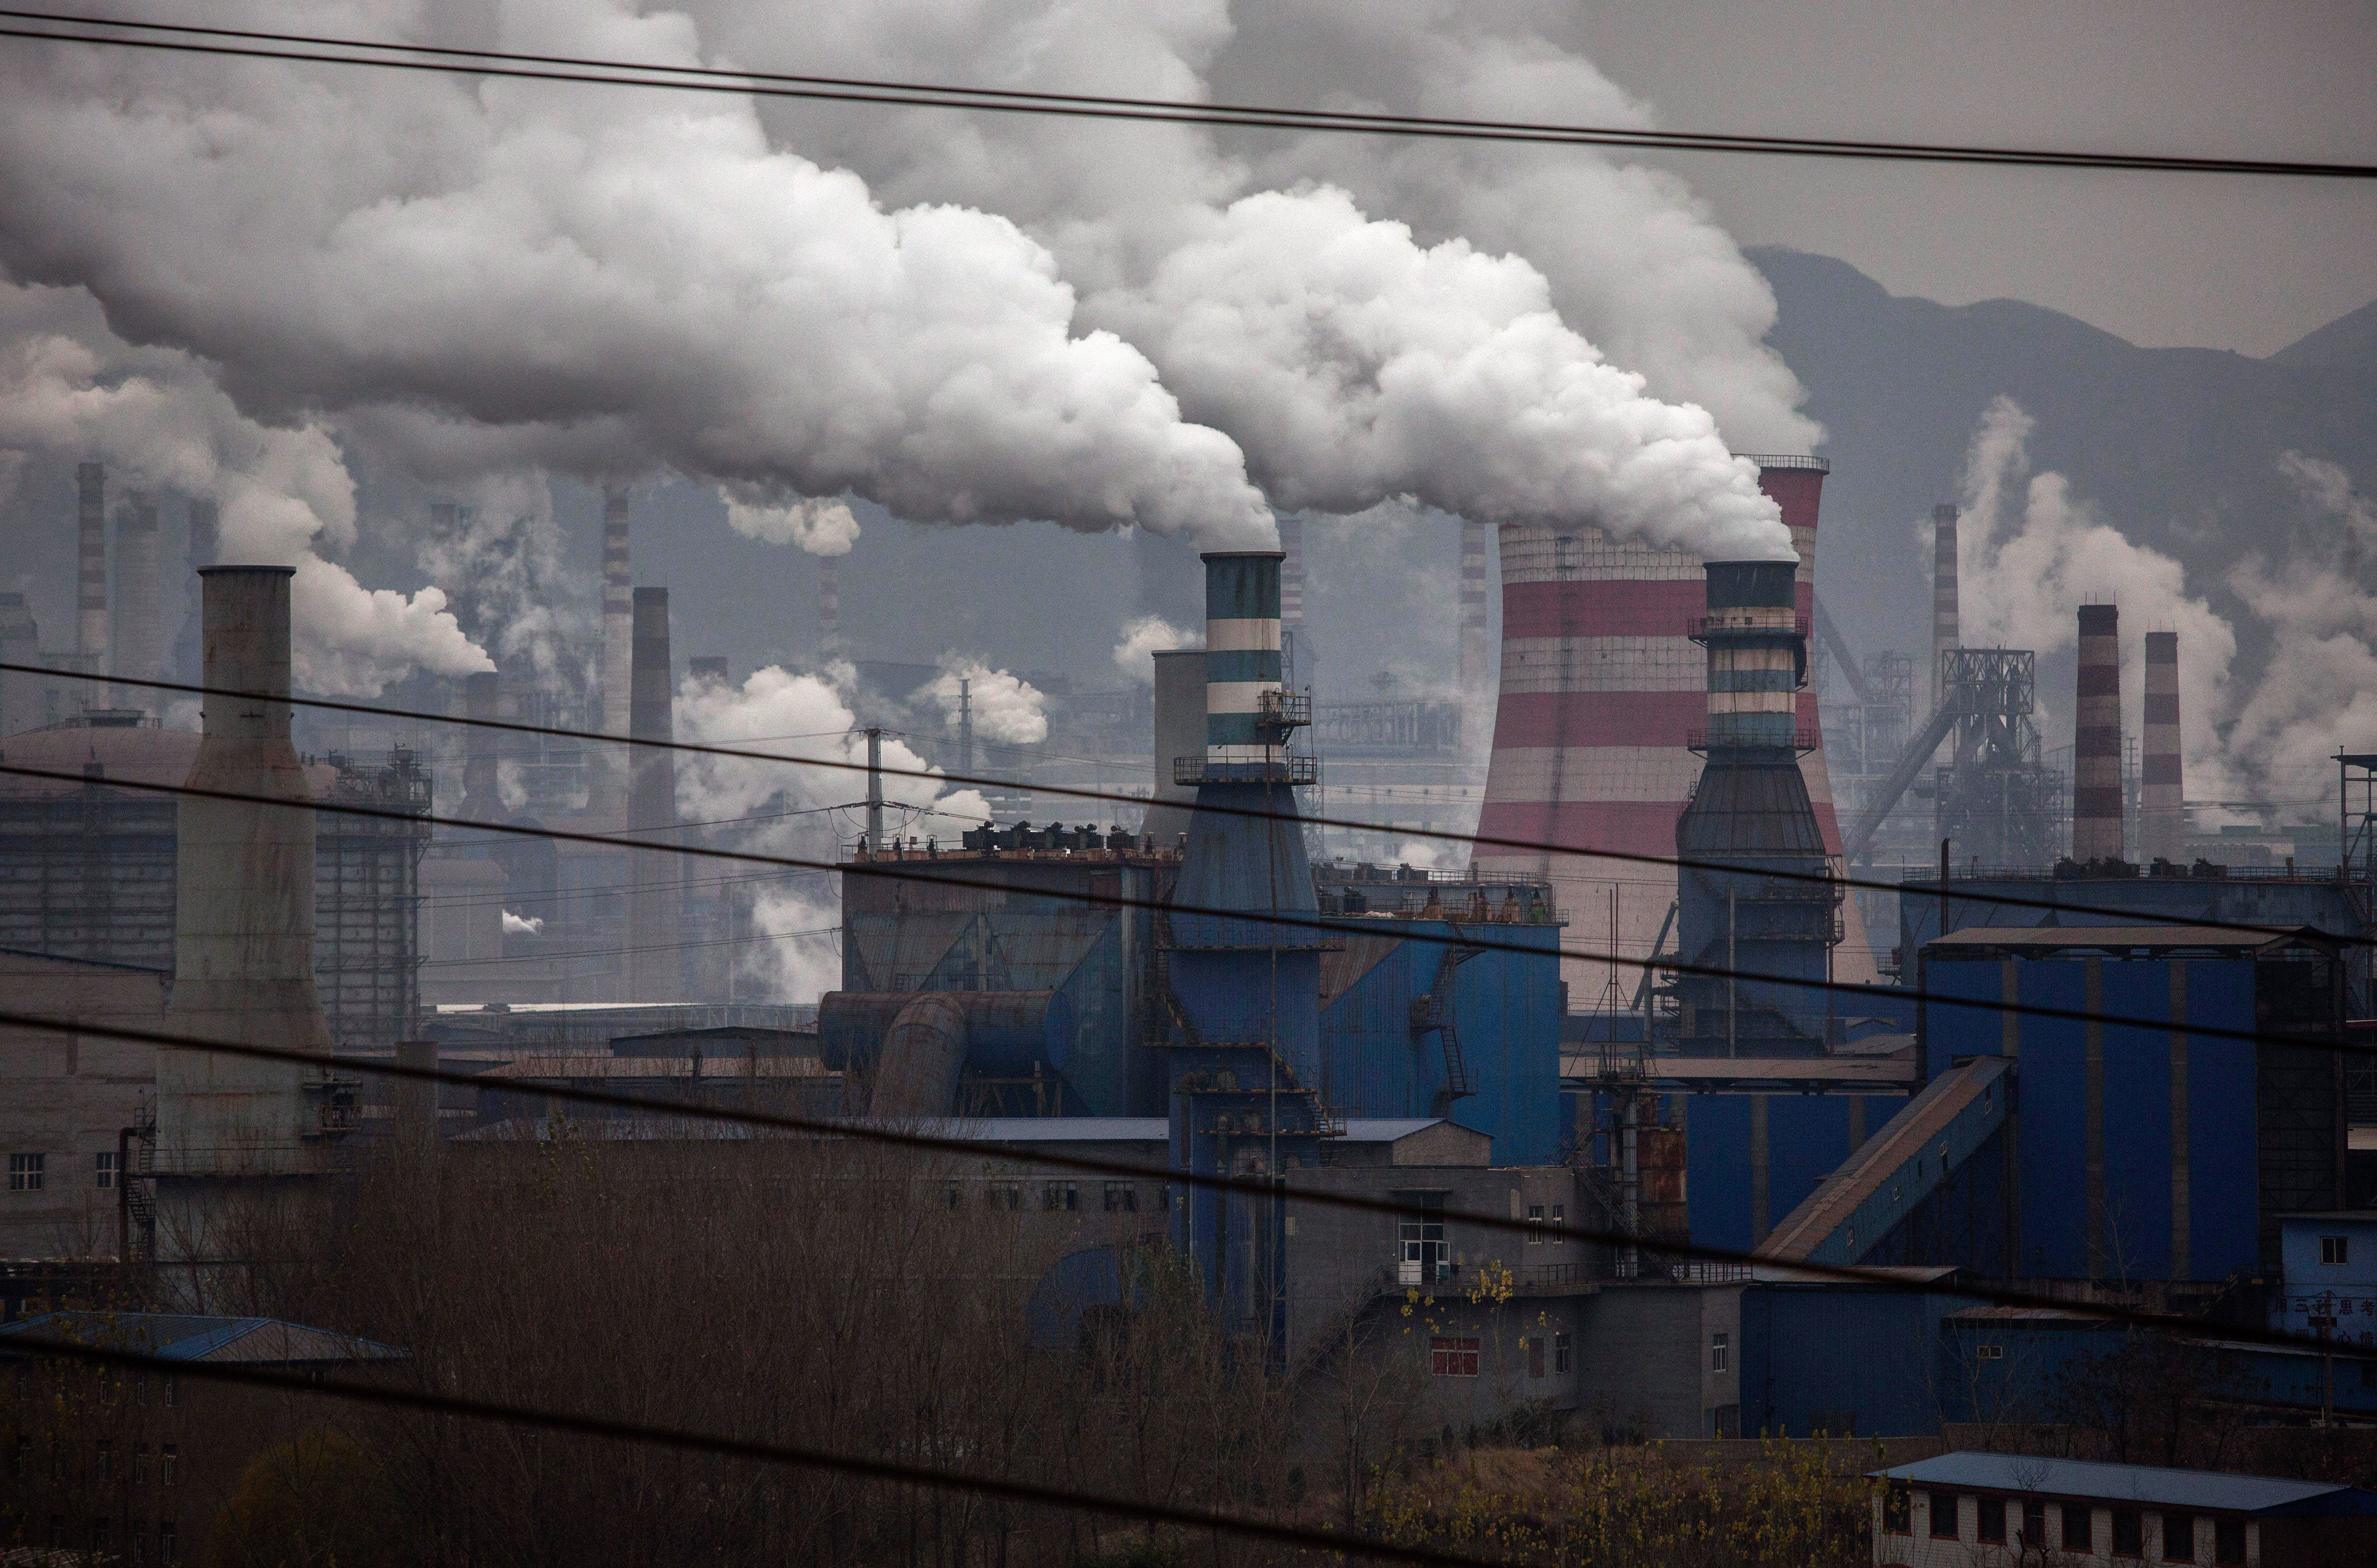 Smoke billows from smokestacks and a coal fired generator at a steel factory in the industrial province of Hebei, China.